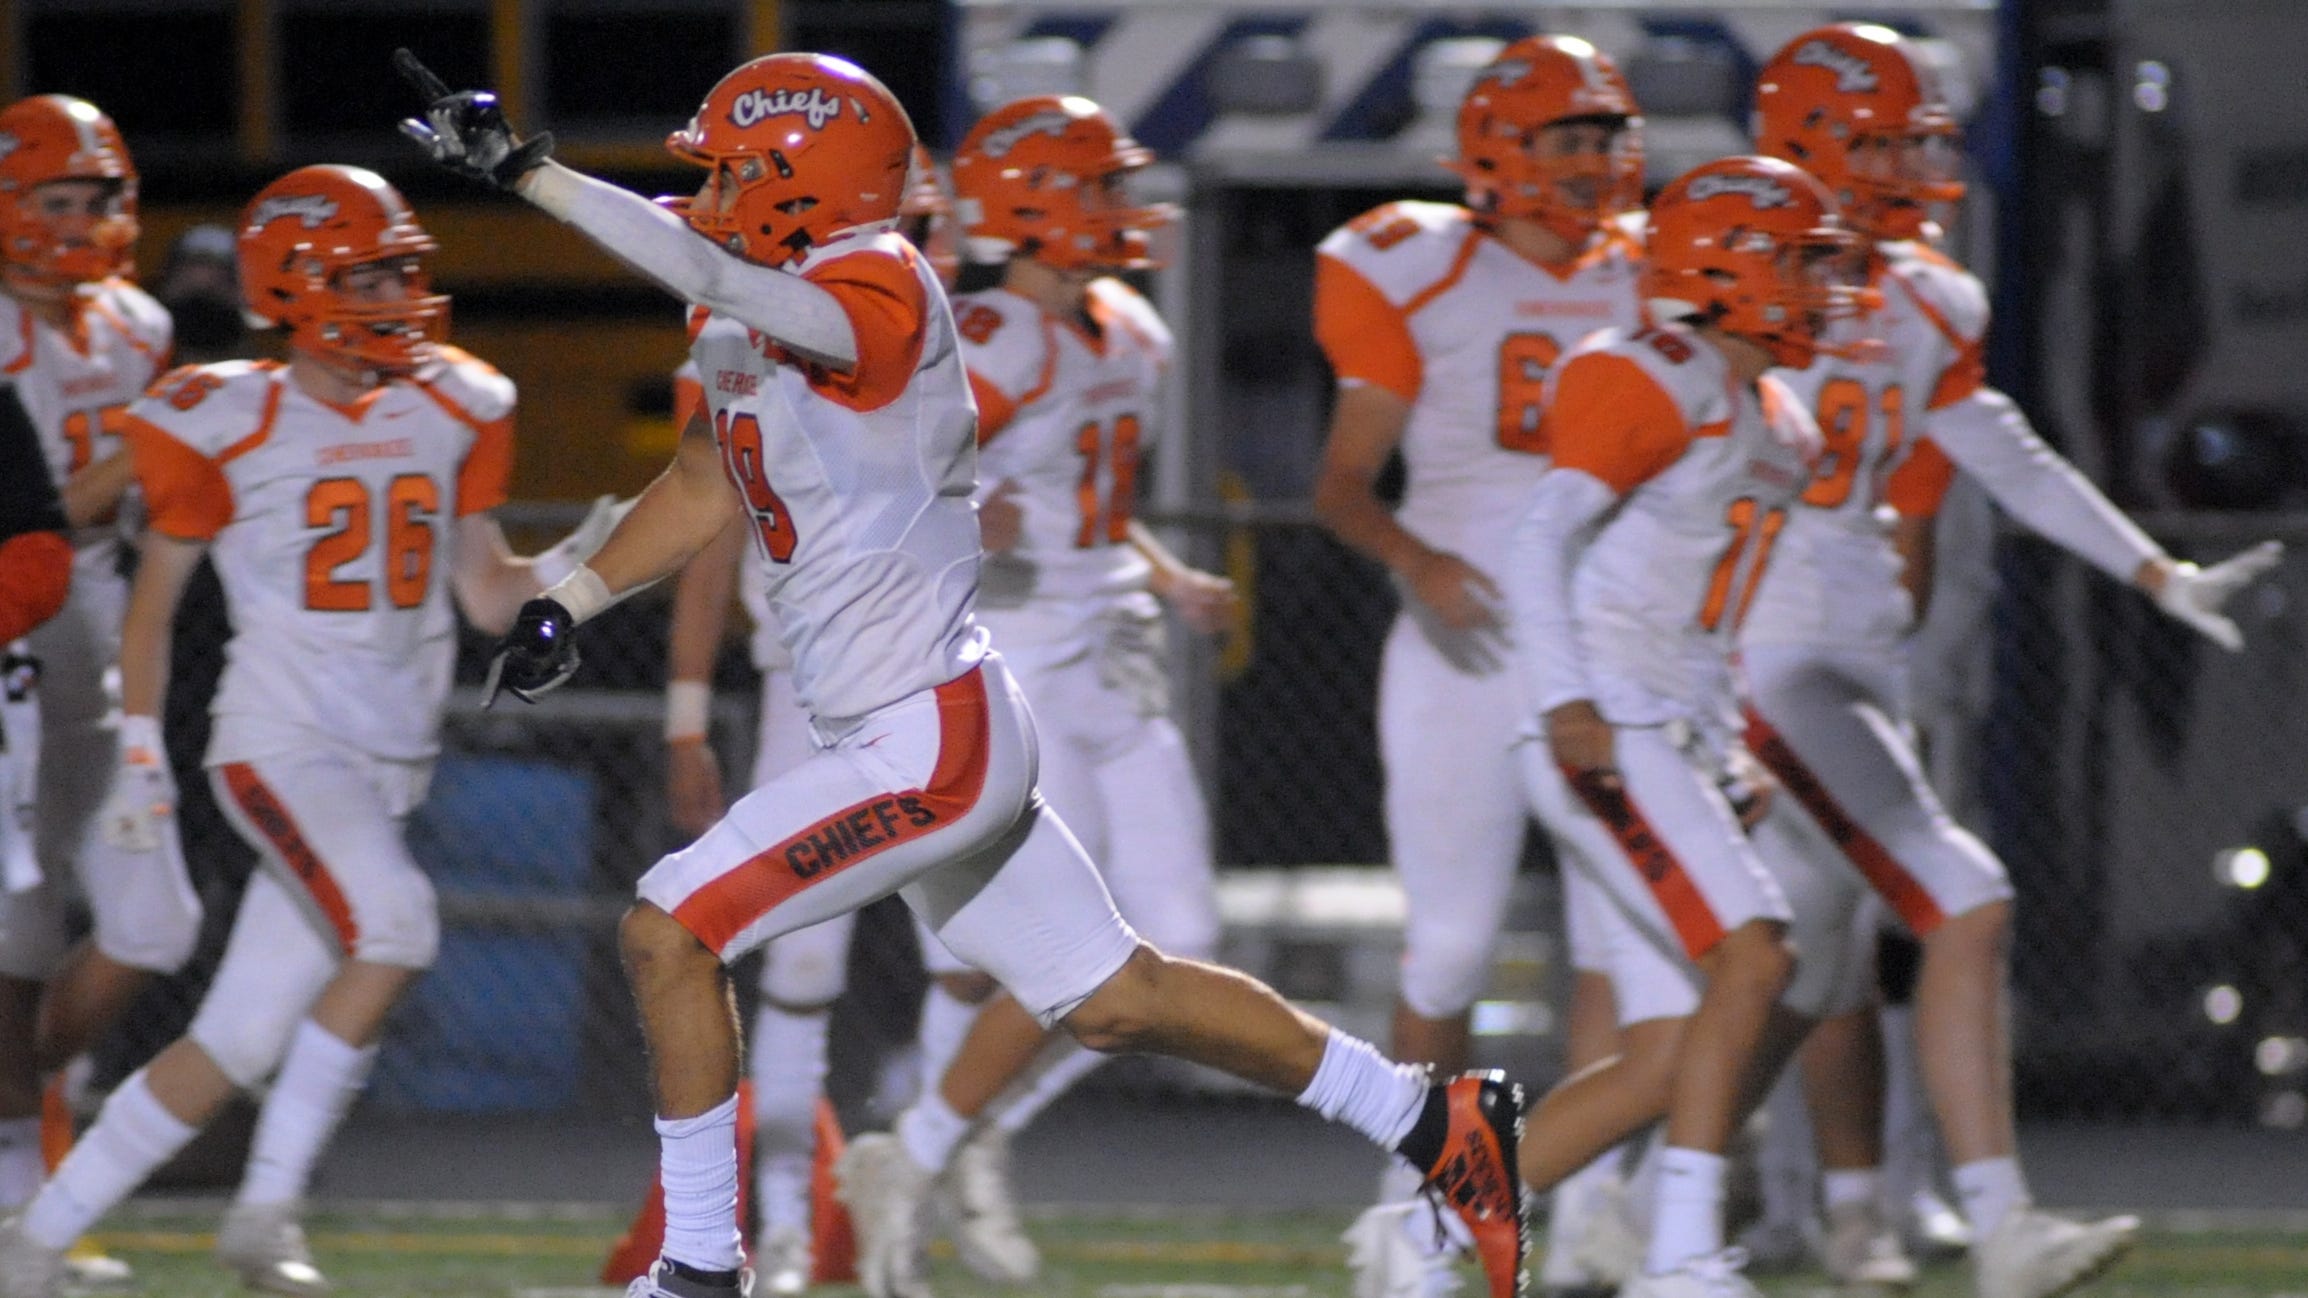 Cherokee football beats Shawnee with lastminute touchdown